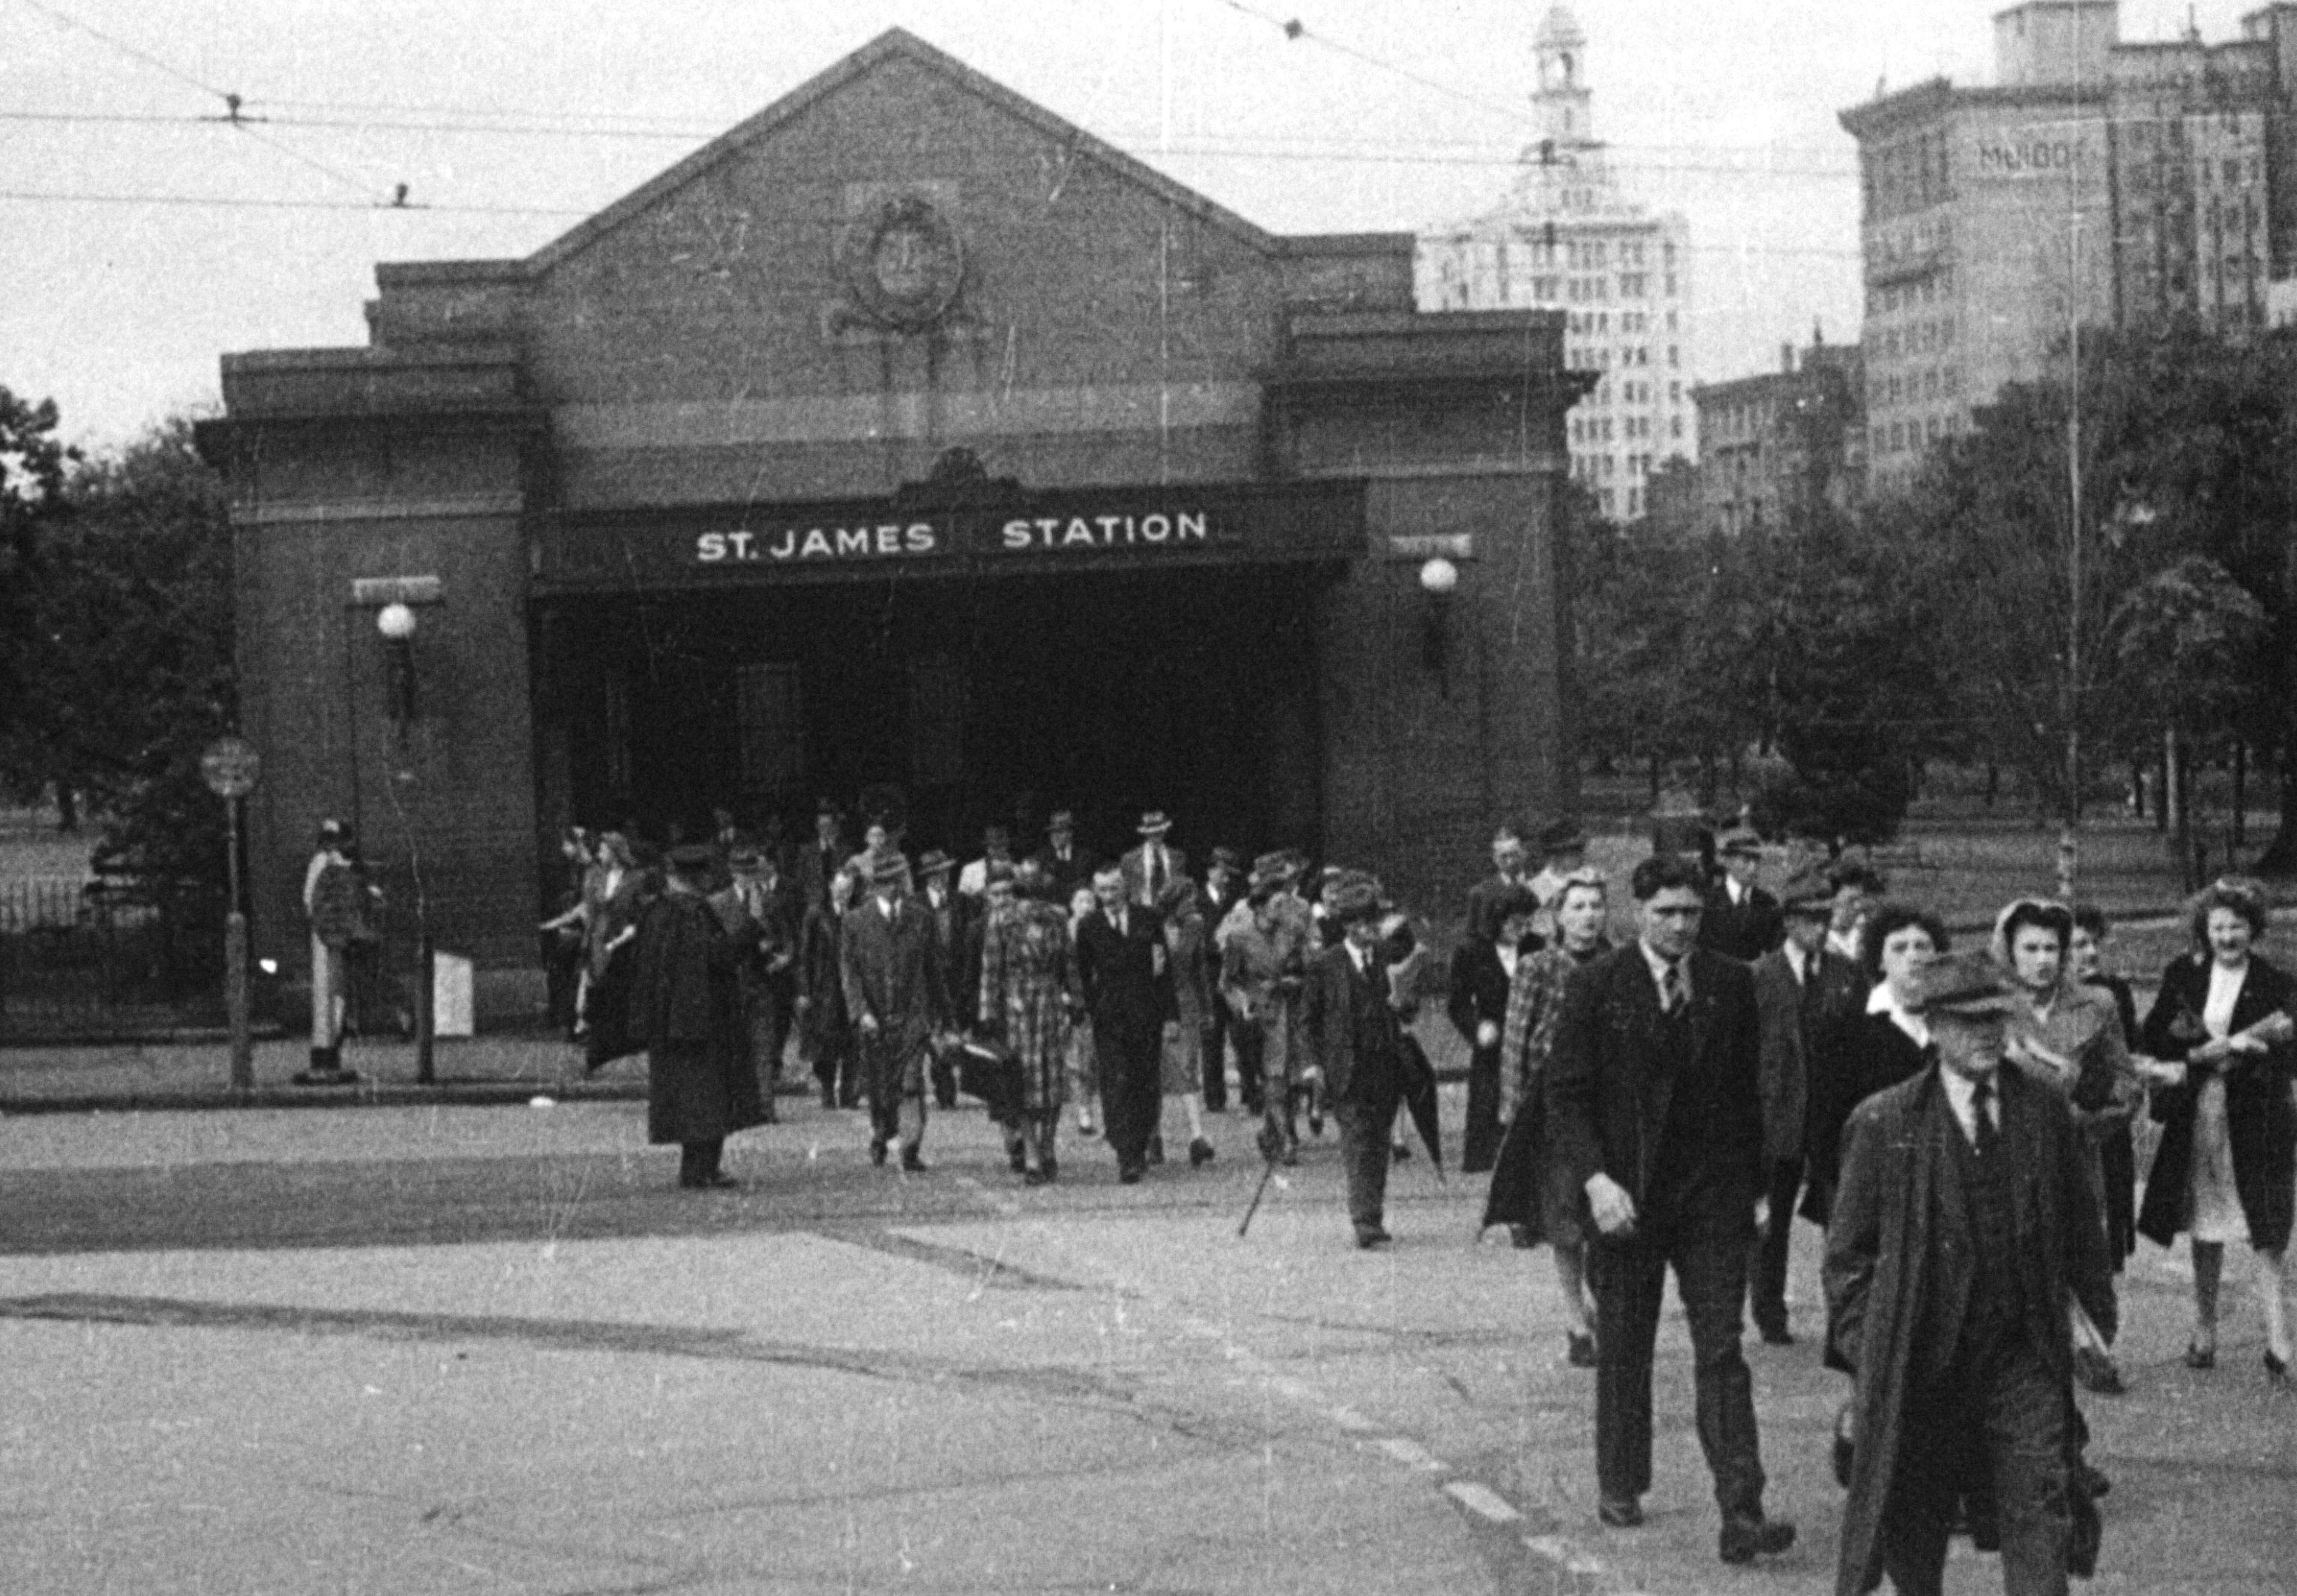 Black and white still of the front of St James Station in Sydney from the street.